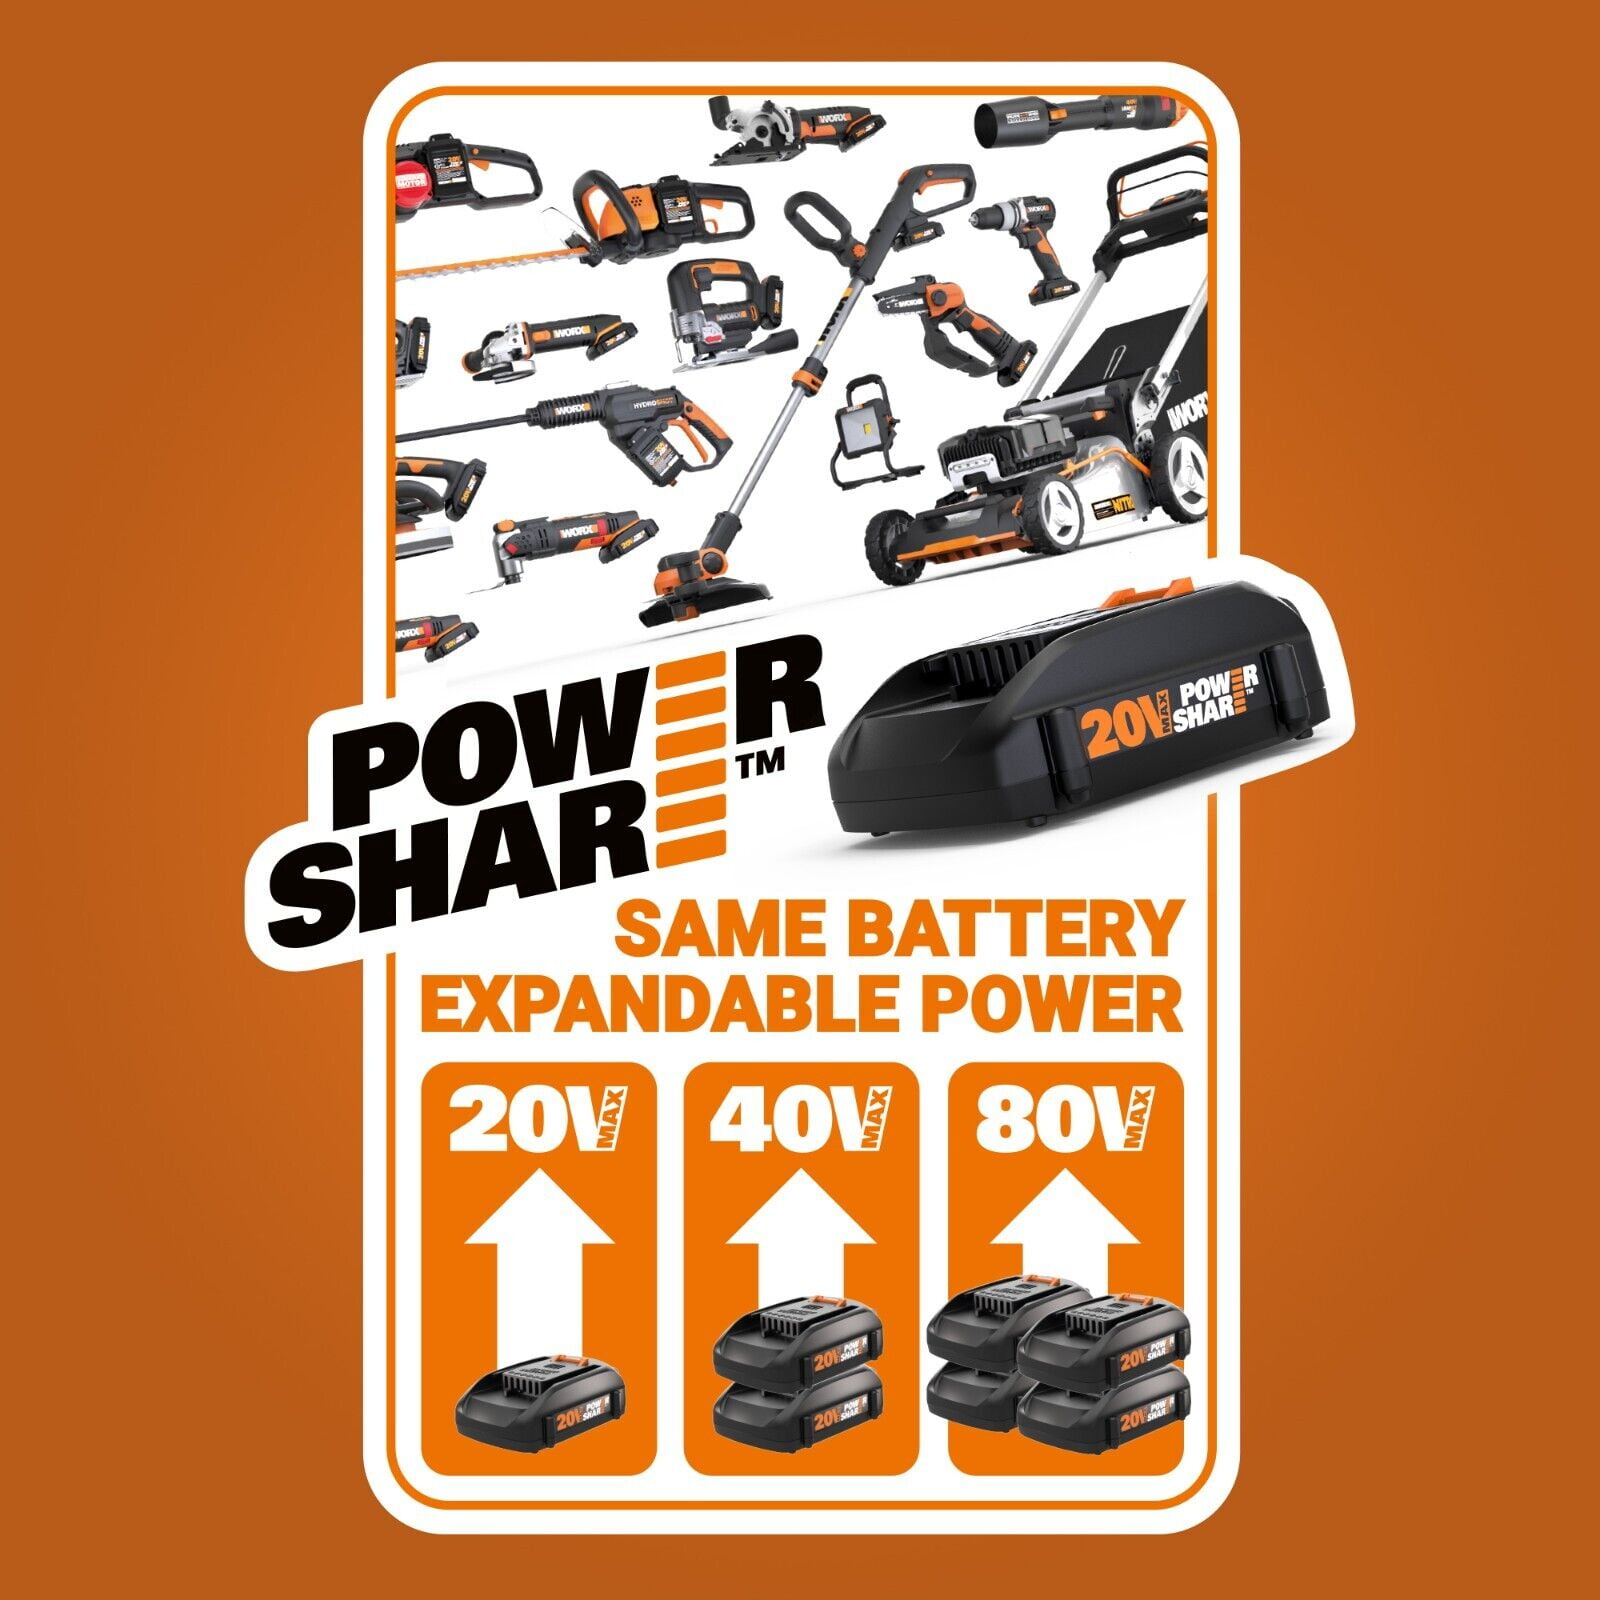 Worx WA4092 Universal Gutter Cleaning Kit for Blowers